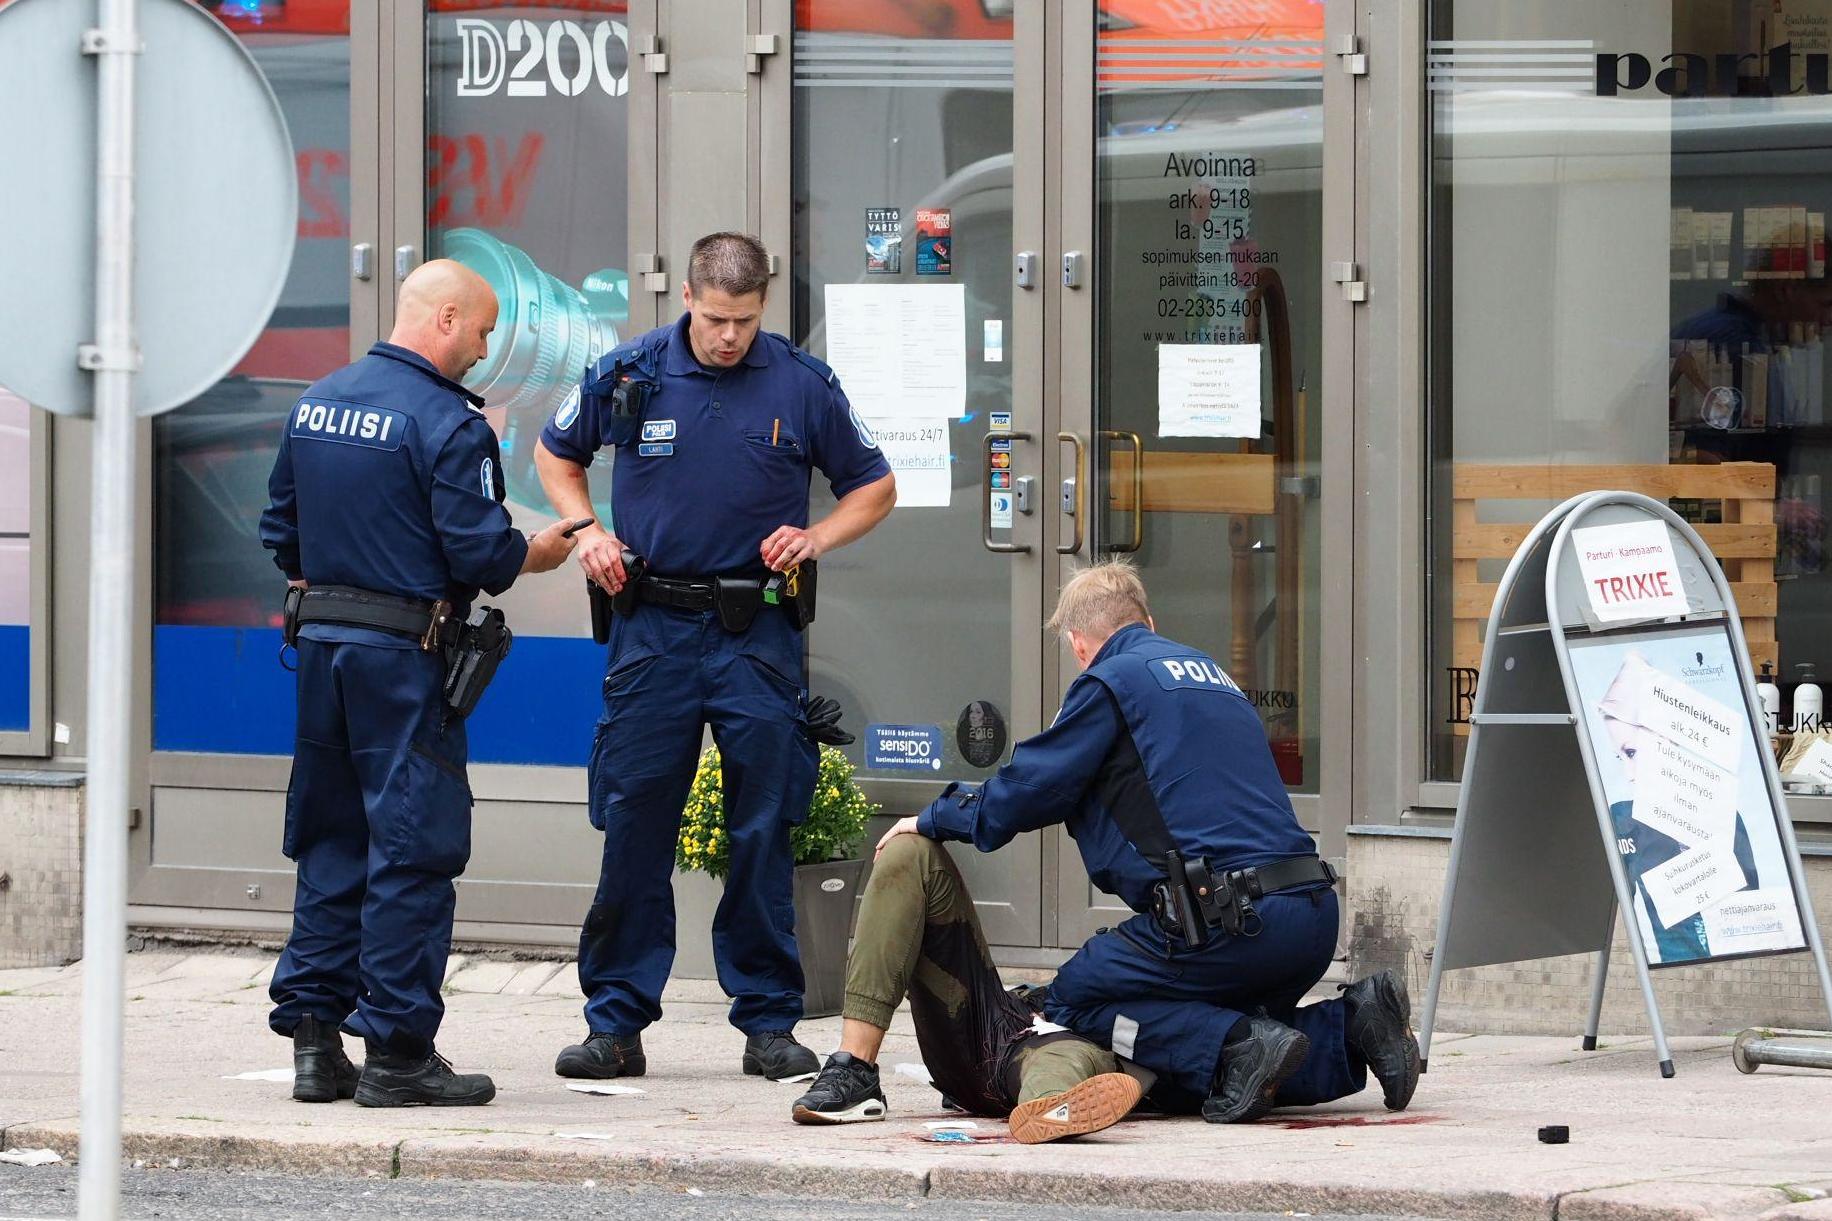 &#13;
Police officers tend to an injured person in Turku &#13;